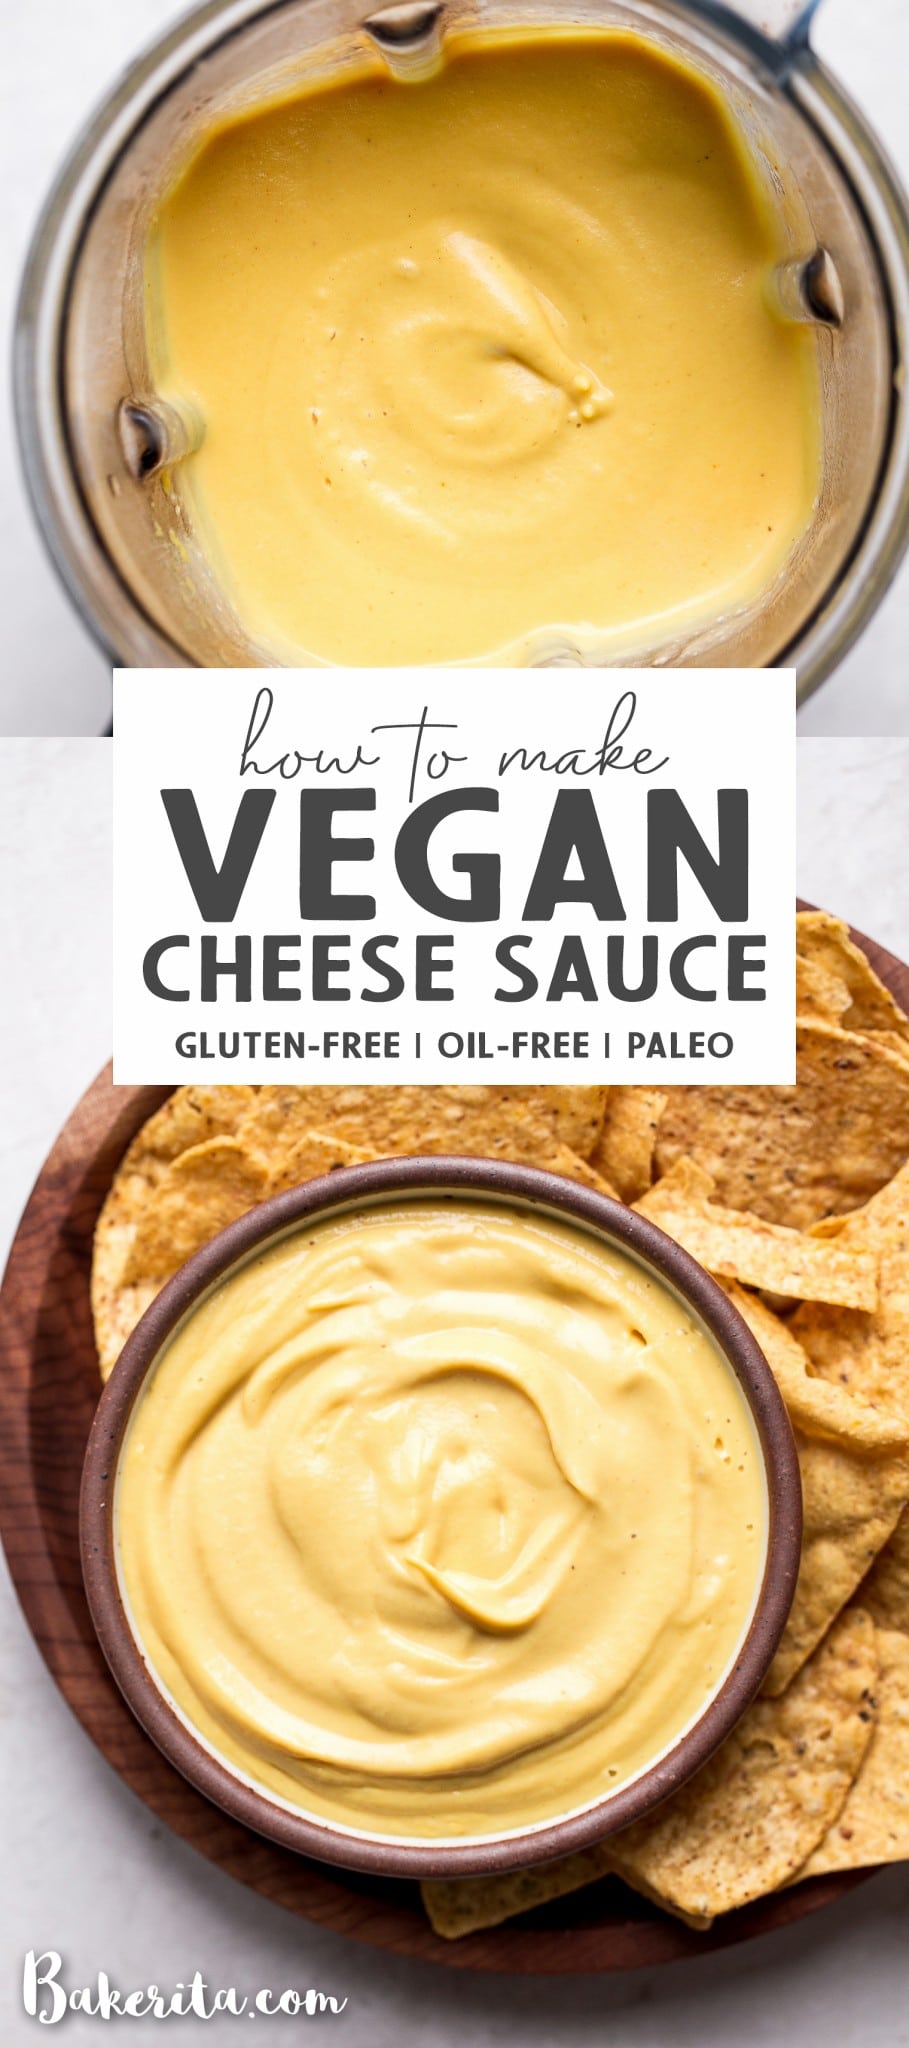 This Vegan Cheese Sauce recipe is easy to make and tastes good on just about everything! It's made with vegetables and cashews for an oil-free, dairy-free cheese sauce. You'll love it with pasta or vegetables, on nachos, and taco bowls, or used as a vegan cheese dip with chips or veggies.